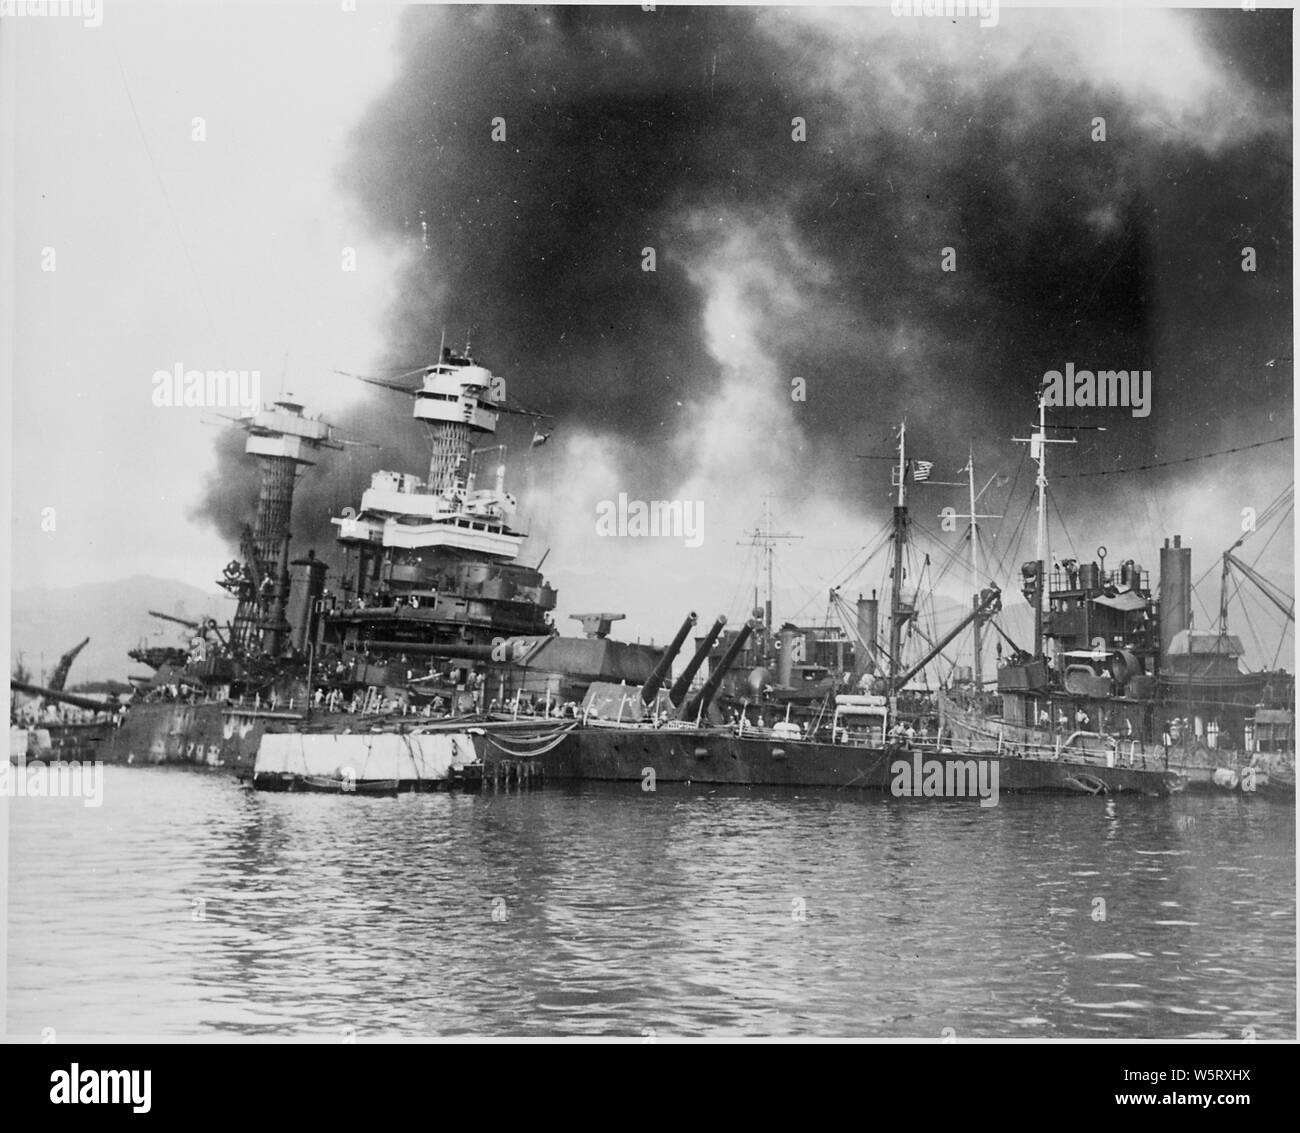 Naval photograph documenting the Japanese attack on Pearl Harbor, Hawaii which initiated US participation in World War II. Navy's caption: The sunken battleship USS CALIFORNIA after being hit by the Japanese during their sneak attack on Pearl Harbor on Dec. 7, 1941.; Scope and content:  This photograph was originally taken by a Naval photographer immediately after the Japanese attack on Pearl Harbor, but came to be filed in a writ of application for habeas corpus case (number 298) tried in the US District Court, District of Hawaii in 1944. The case, In Re Lloyd C. Duncan related to imposition Stock Photo